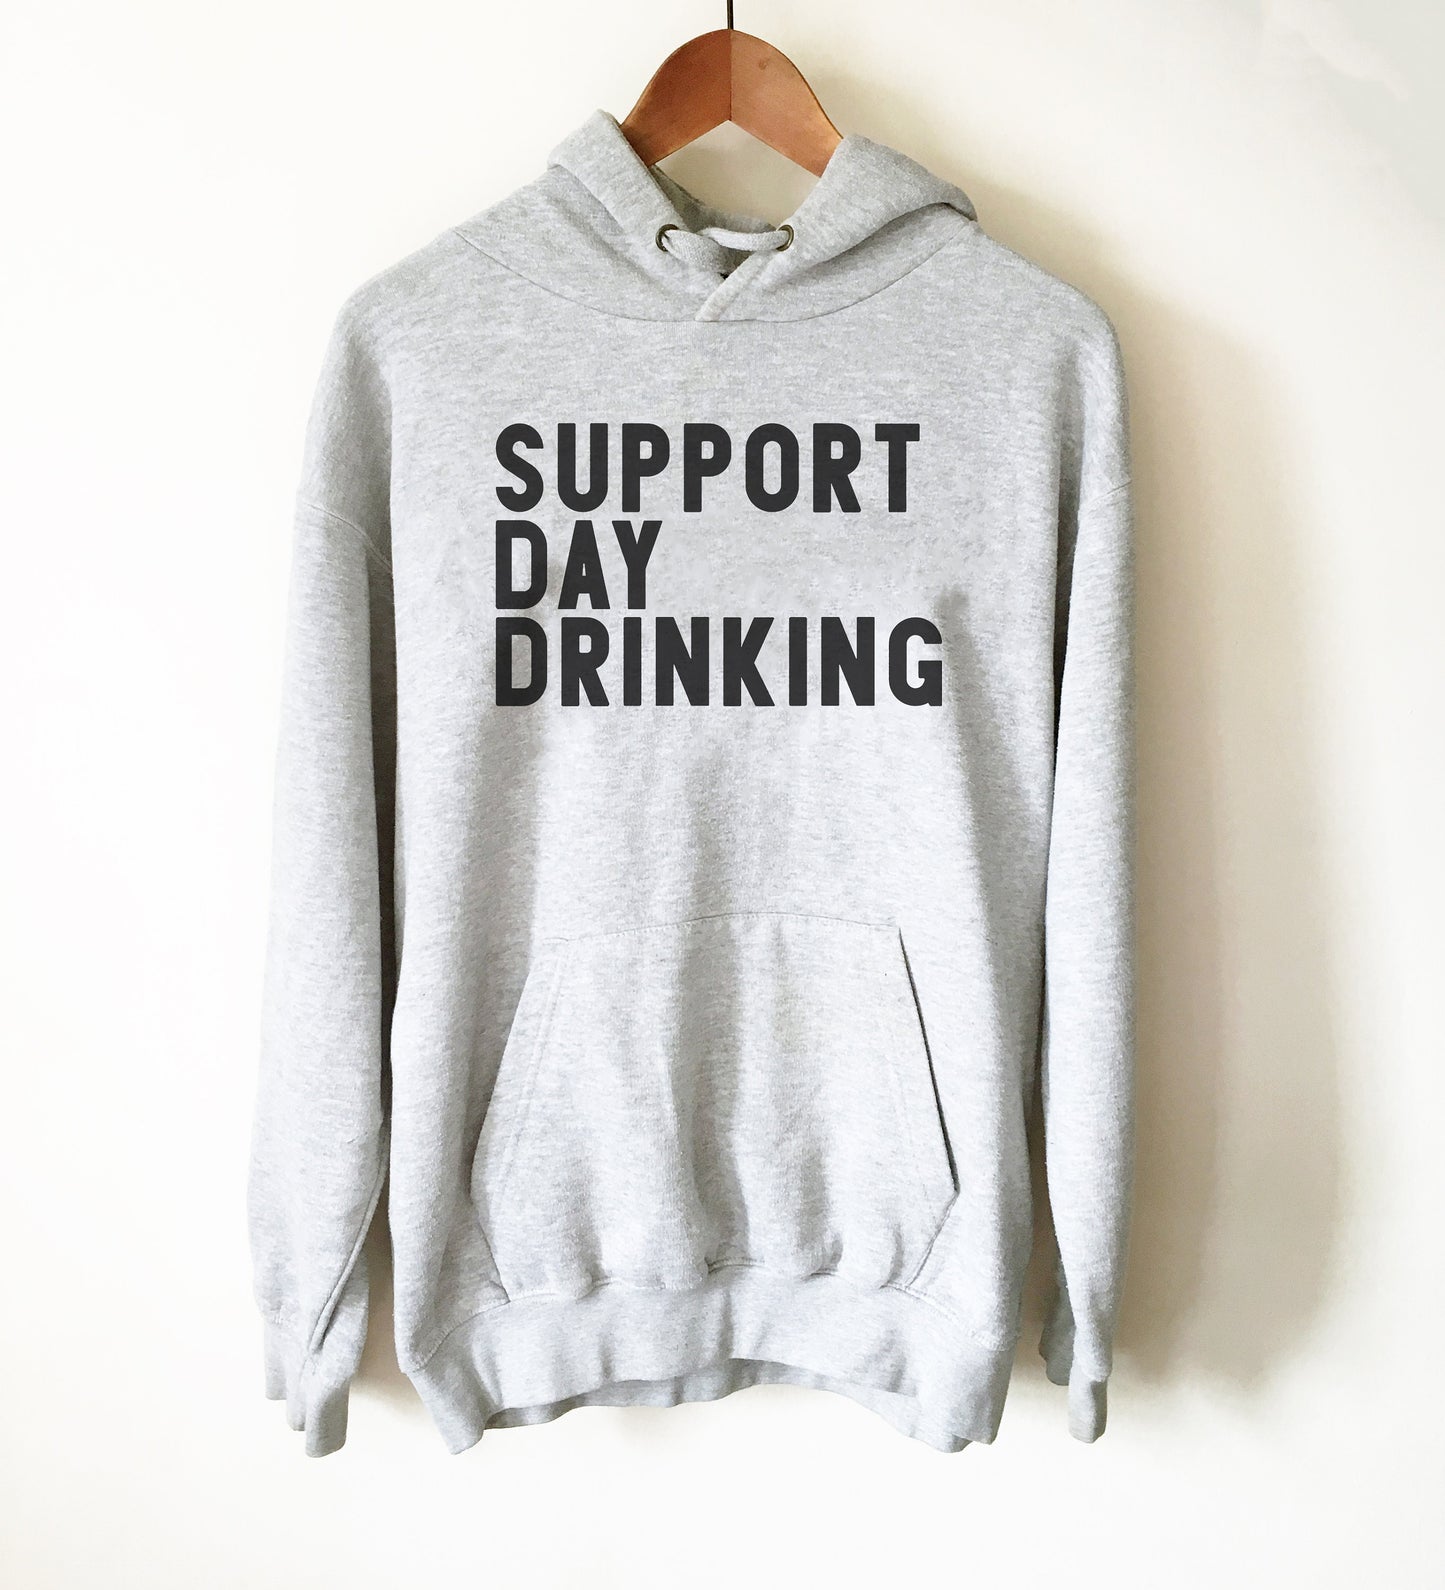 Support Day Drinking Hoodie -- Day Drinking Shirt, Drinking Shirts, Drunk Shirt, Funny Drinking Shirt, Drinking Team Shirts, Bachelorette